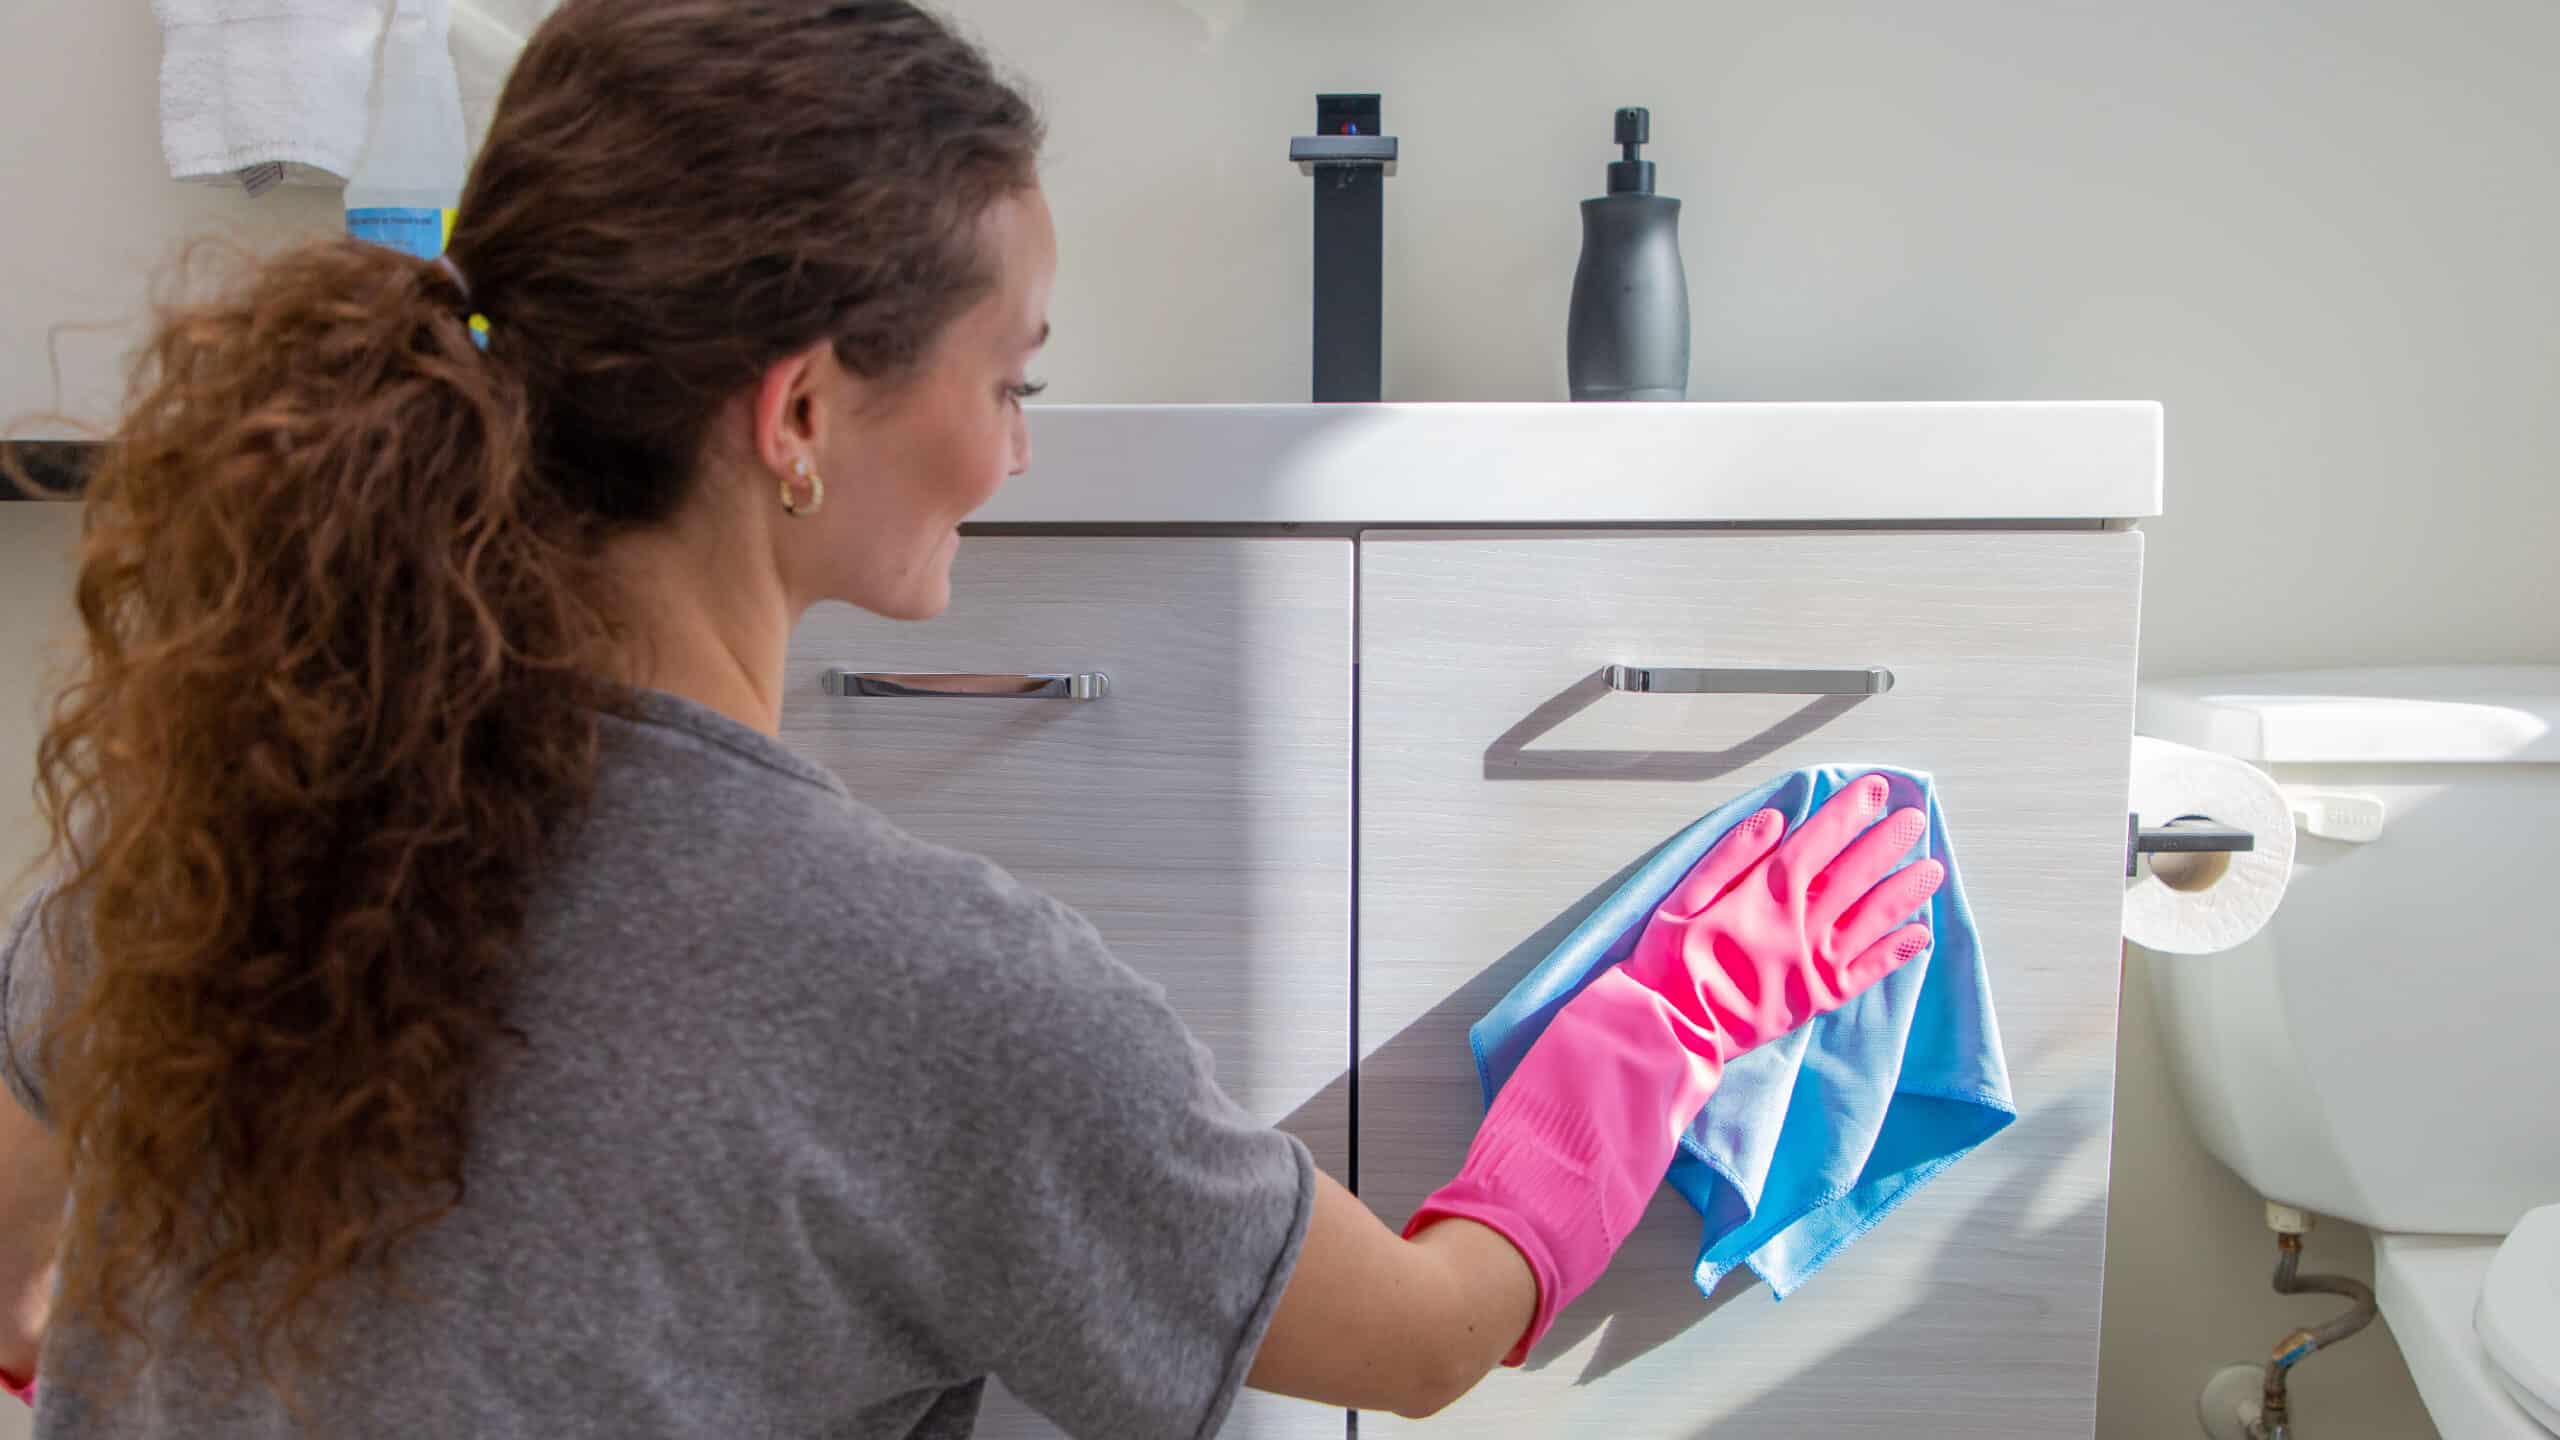 Choosing The Best Cleaning Tools